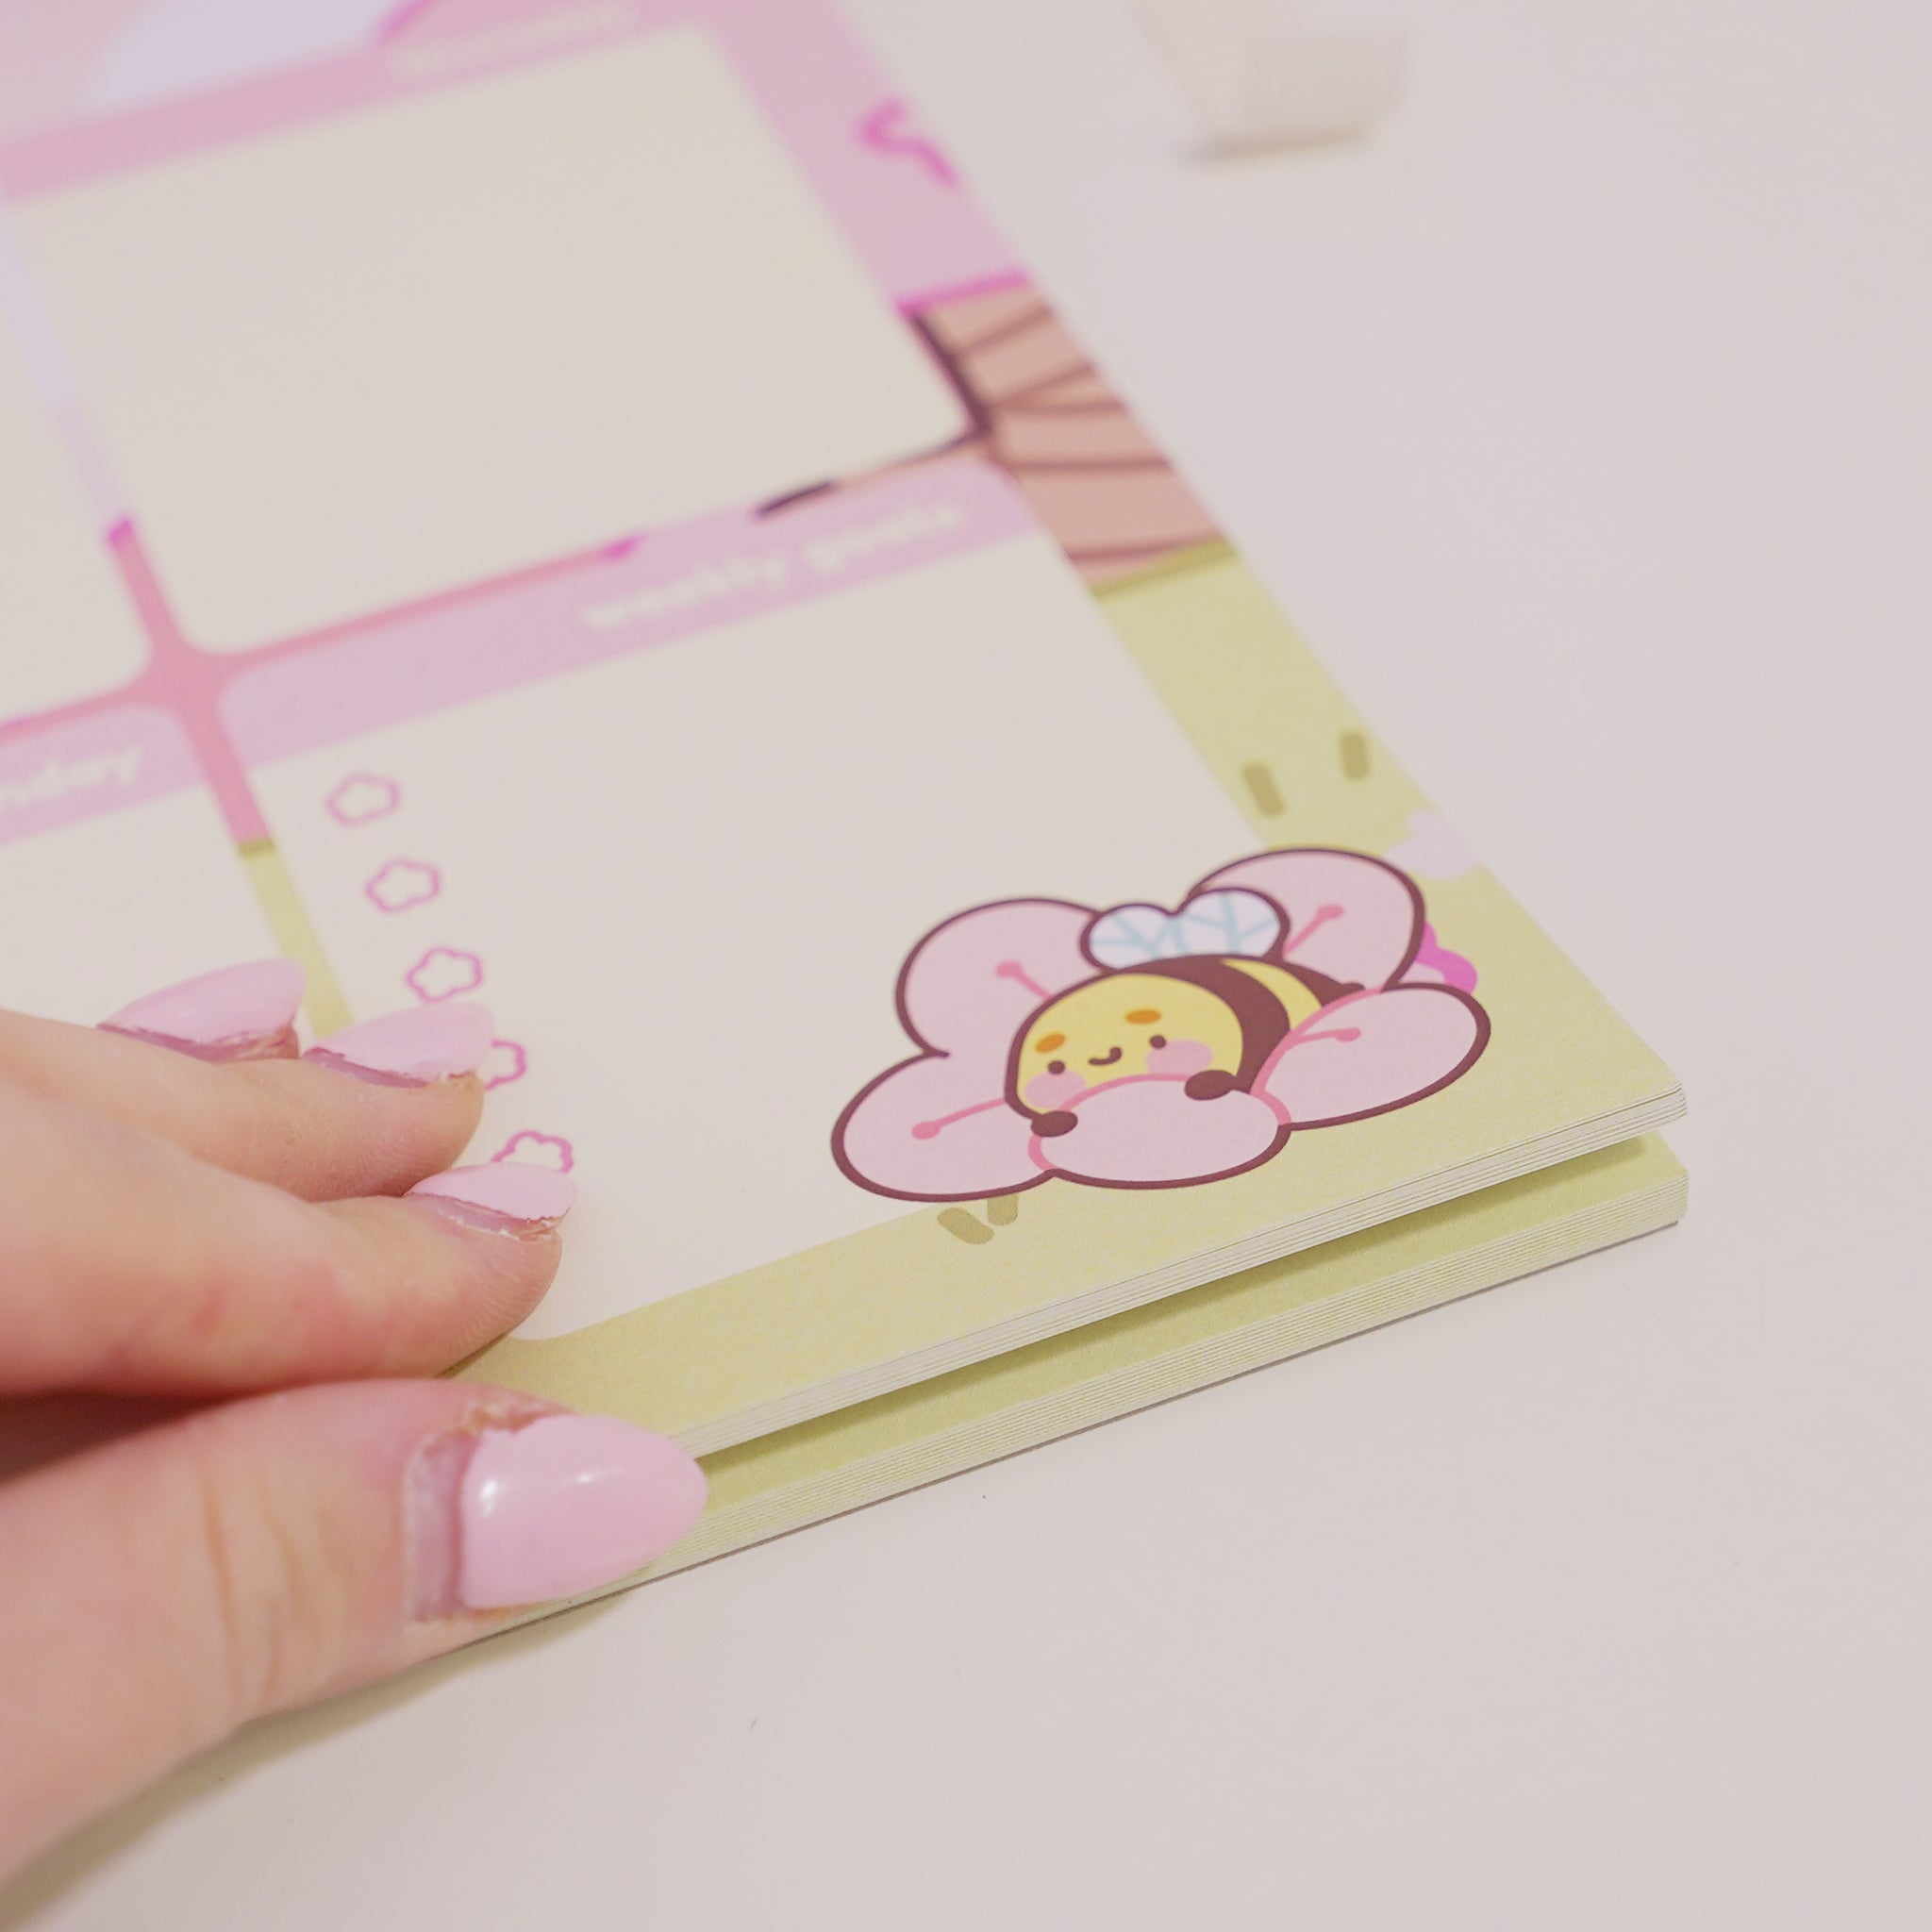 A4 Sakura-inspired desktop planner featuring Bumblebutt the Bumblebee charm and cherry blossom illustrations. Perfect for weekly planning, hand zoomed in